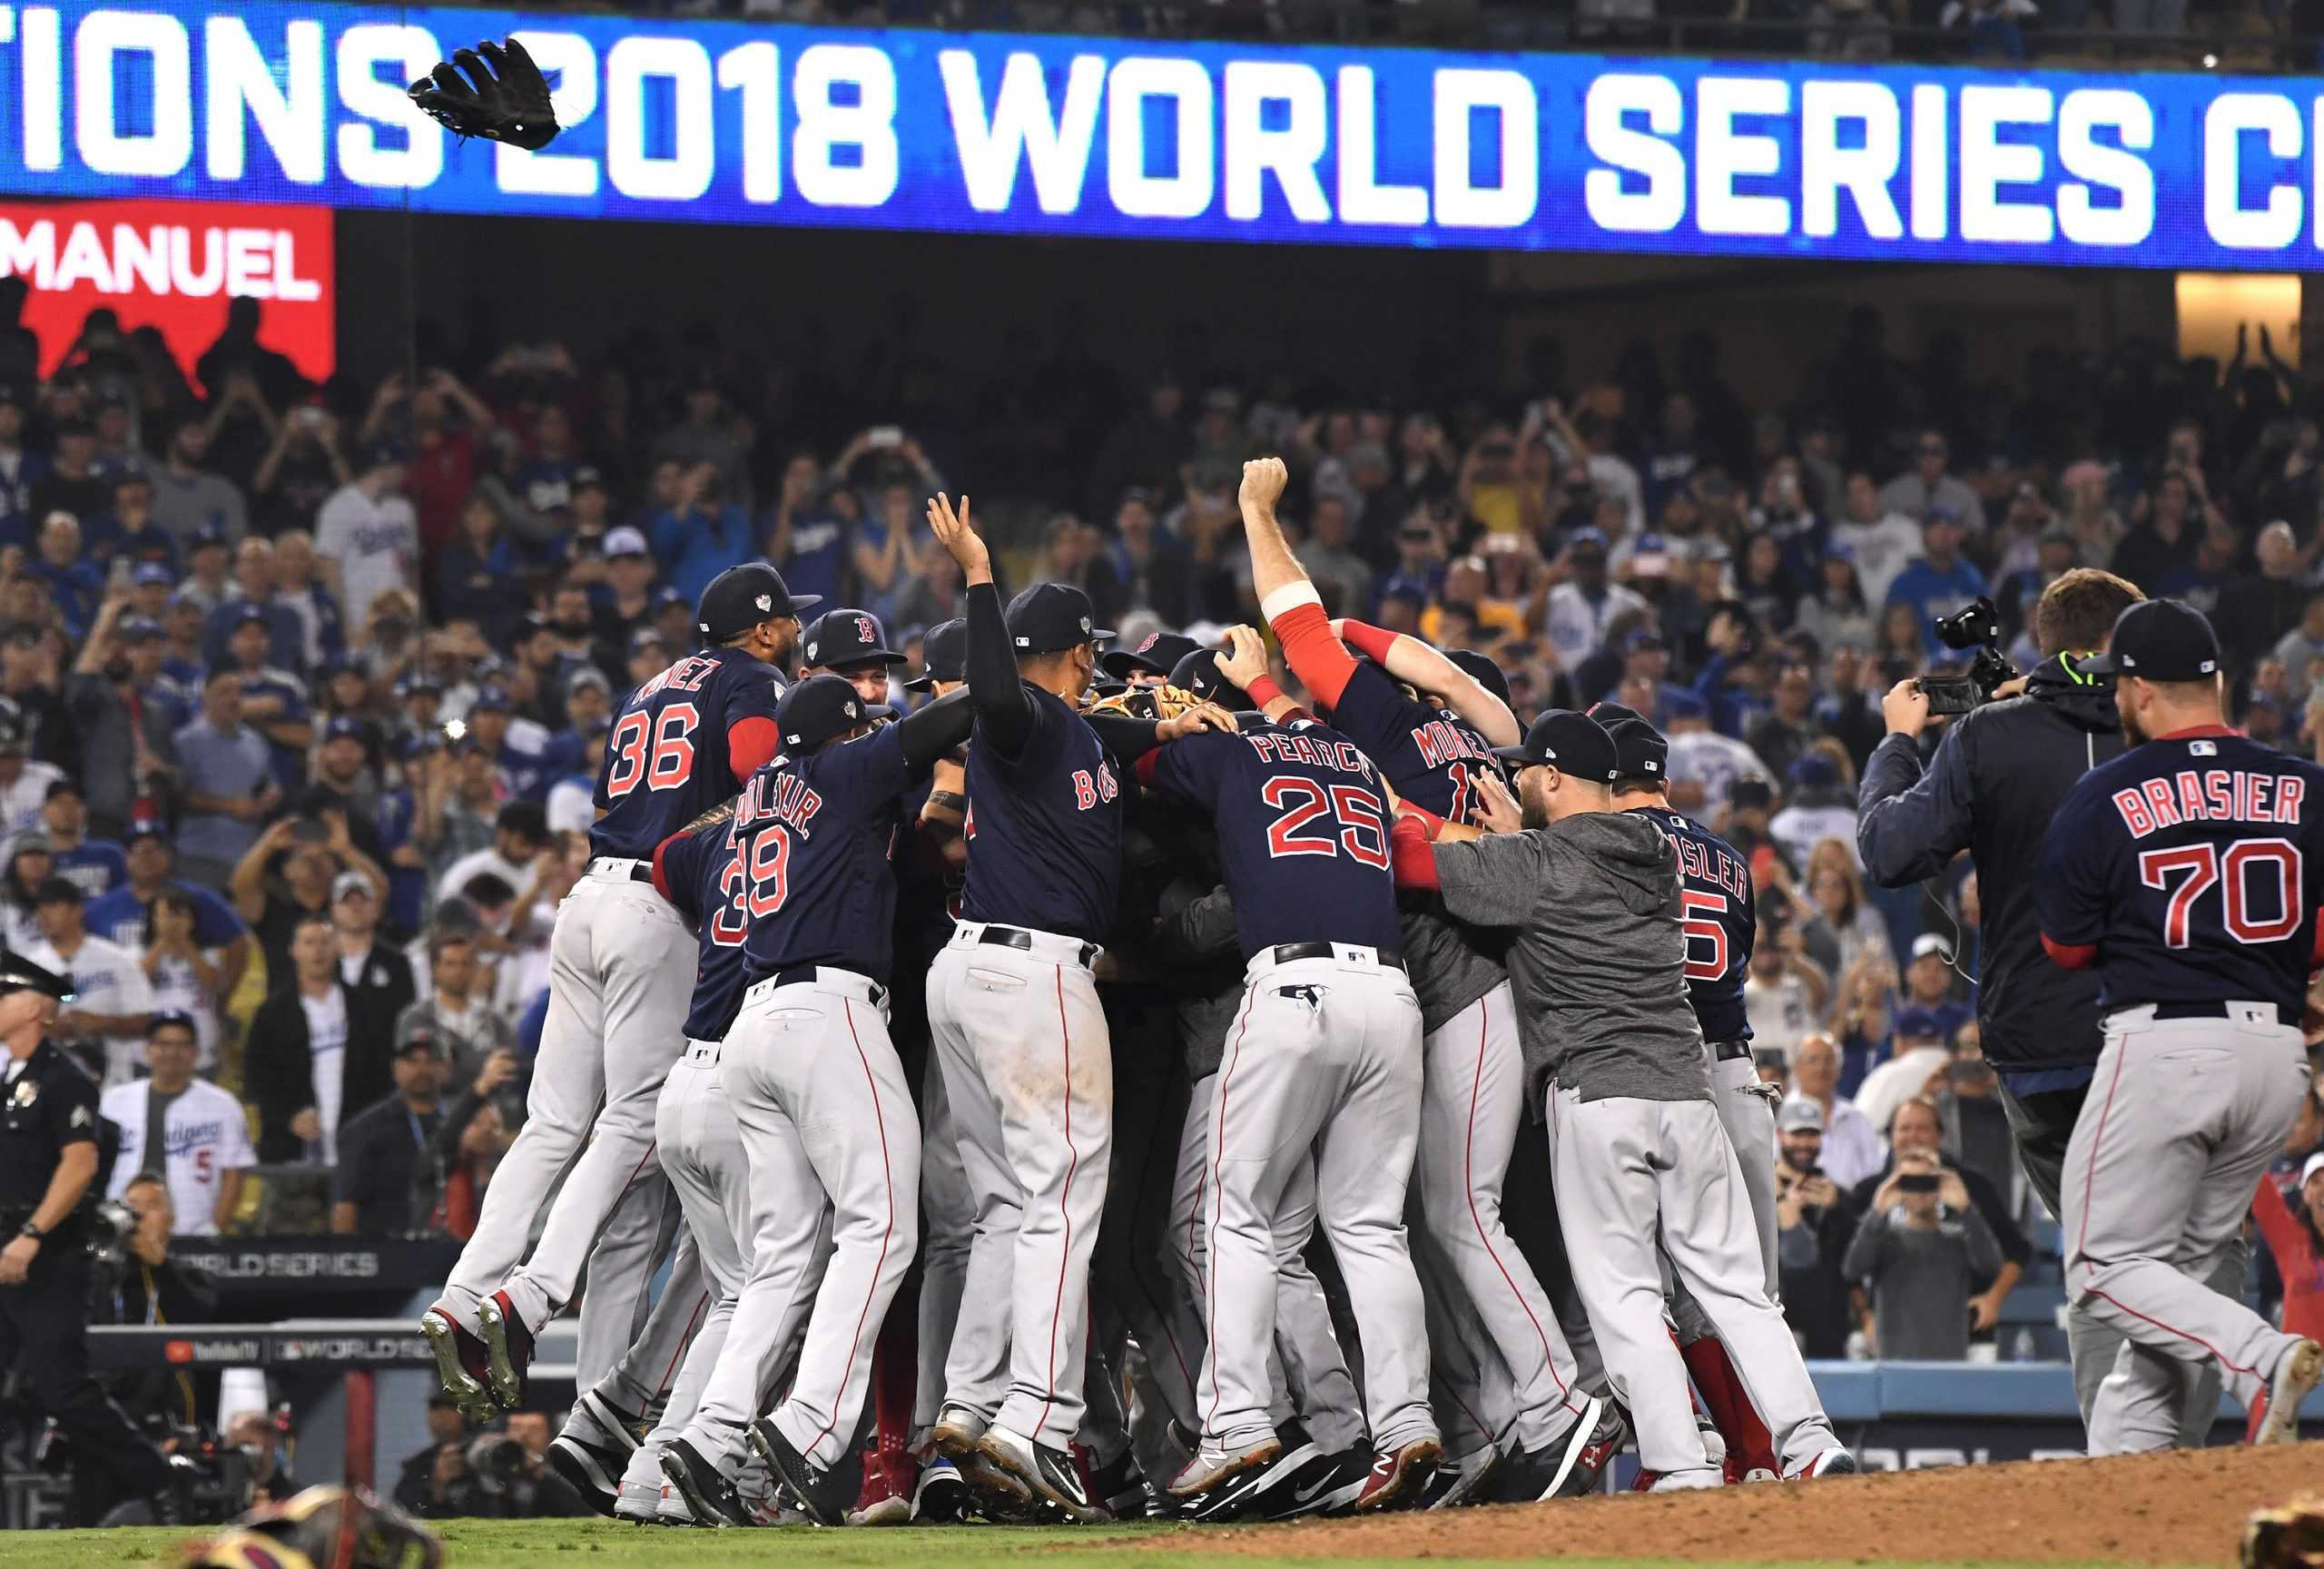 While sports fans love the thrilling feeling that anything can happen in a given season, game, tournament or competition, there are certain facts people assume are sure things: superhuman records will never be beaten, franchises will forever be cursed by championship droughts and sports will always be played a certain way. But as the Red Sox 2018 World Series victory proves, things can change; the once ridiculed team has become a powerhouse in the last decade. Here are other seemingly guaranteed sports truths that have been turned on their heads. (Wally Skalij/Los Angeles Times/TNS)